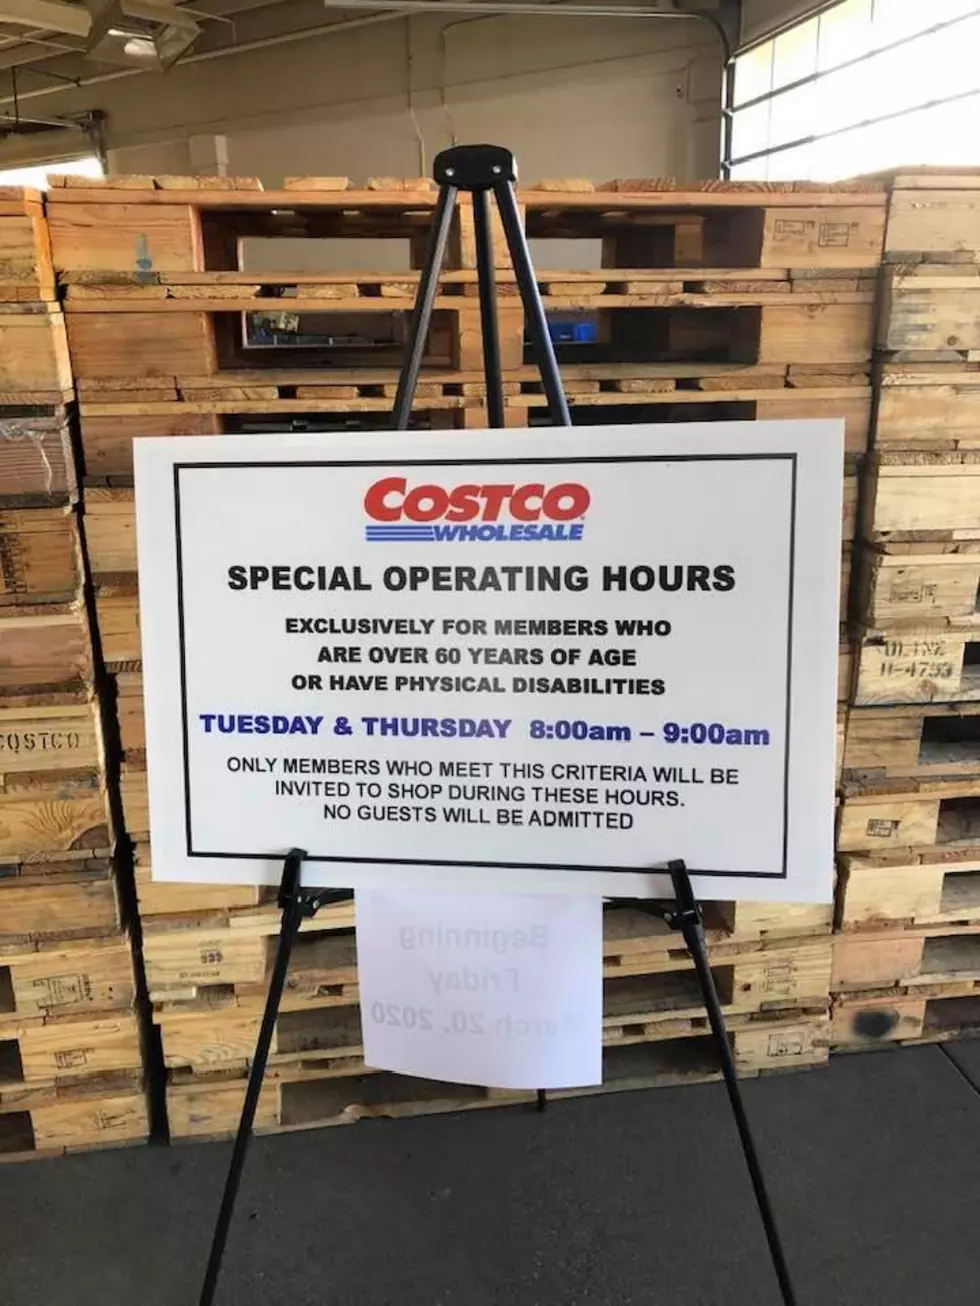 Costco Just Announced Special Shopping Hours for Seniors